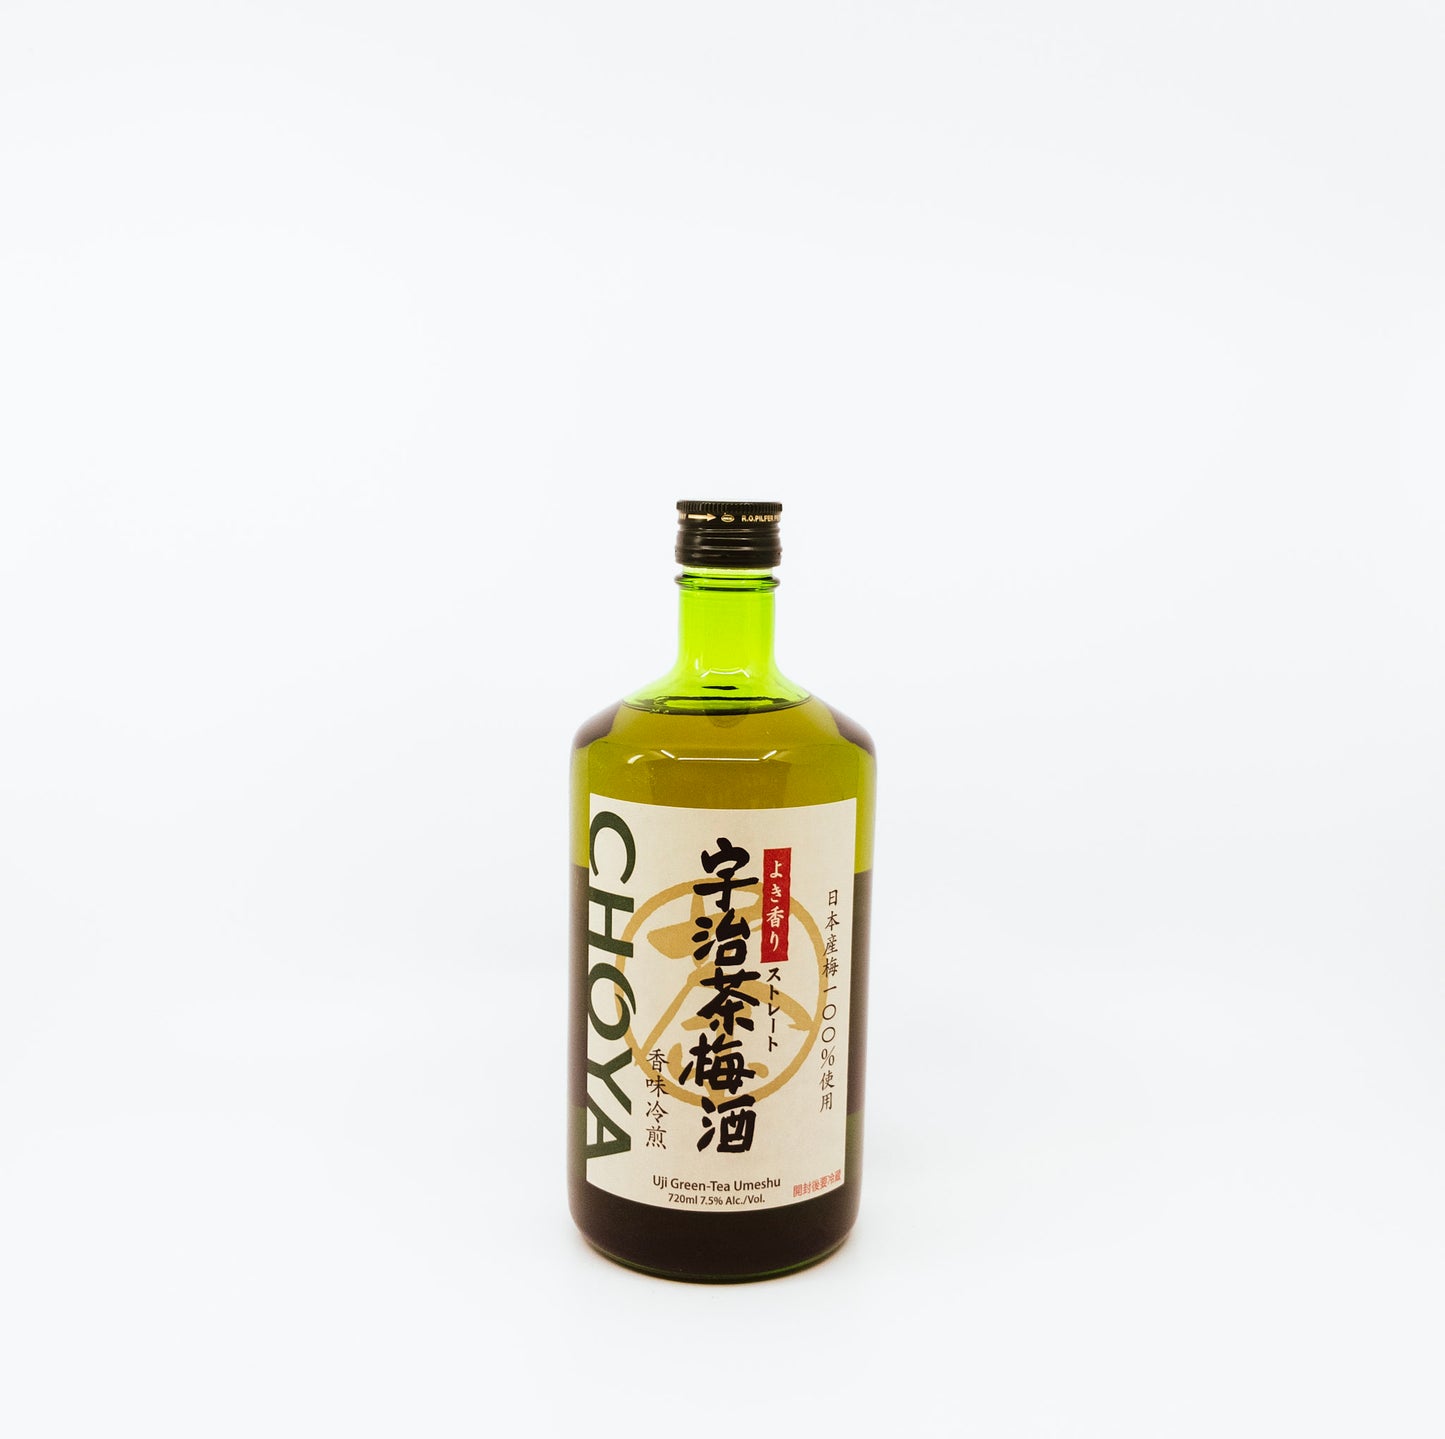 green short bottle with cream label